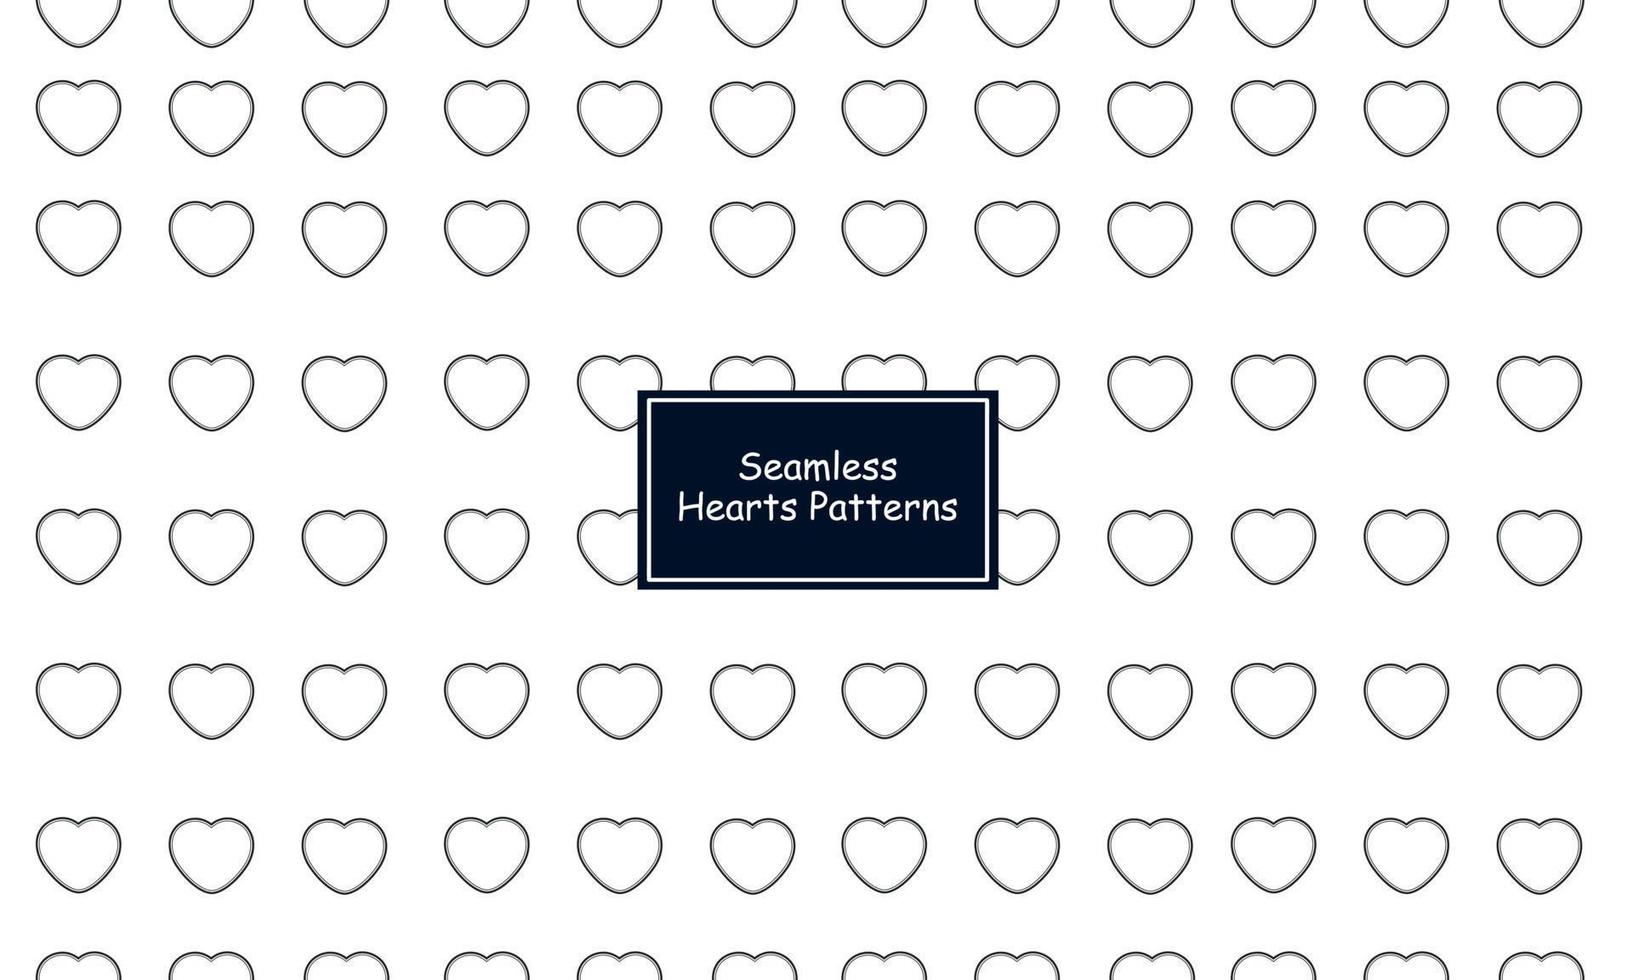 Seamless black and white hearts pattern in a line styleSeamless black and white hearts pattern in a line style vector